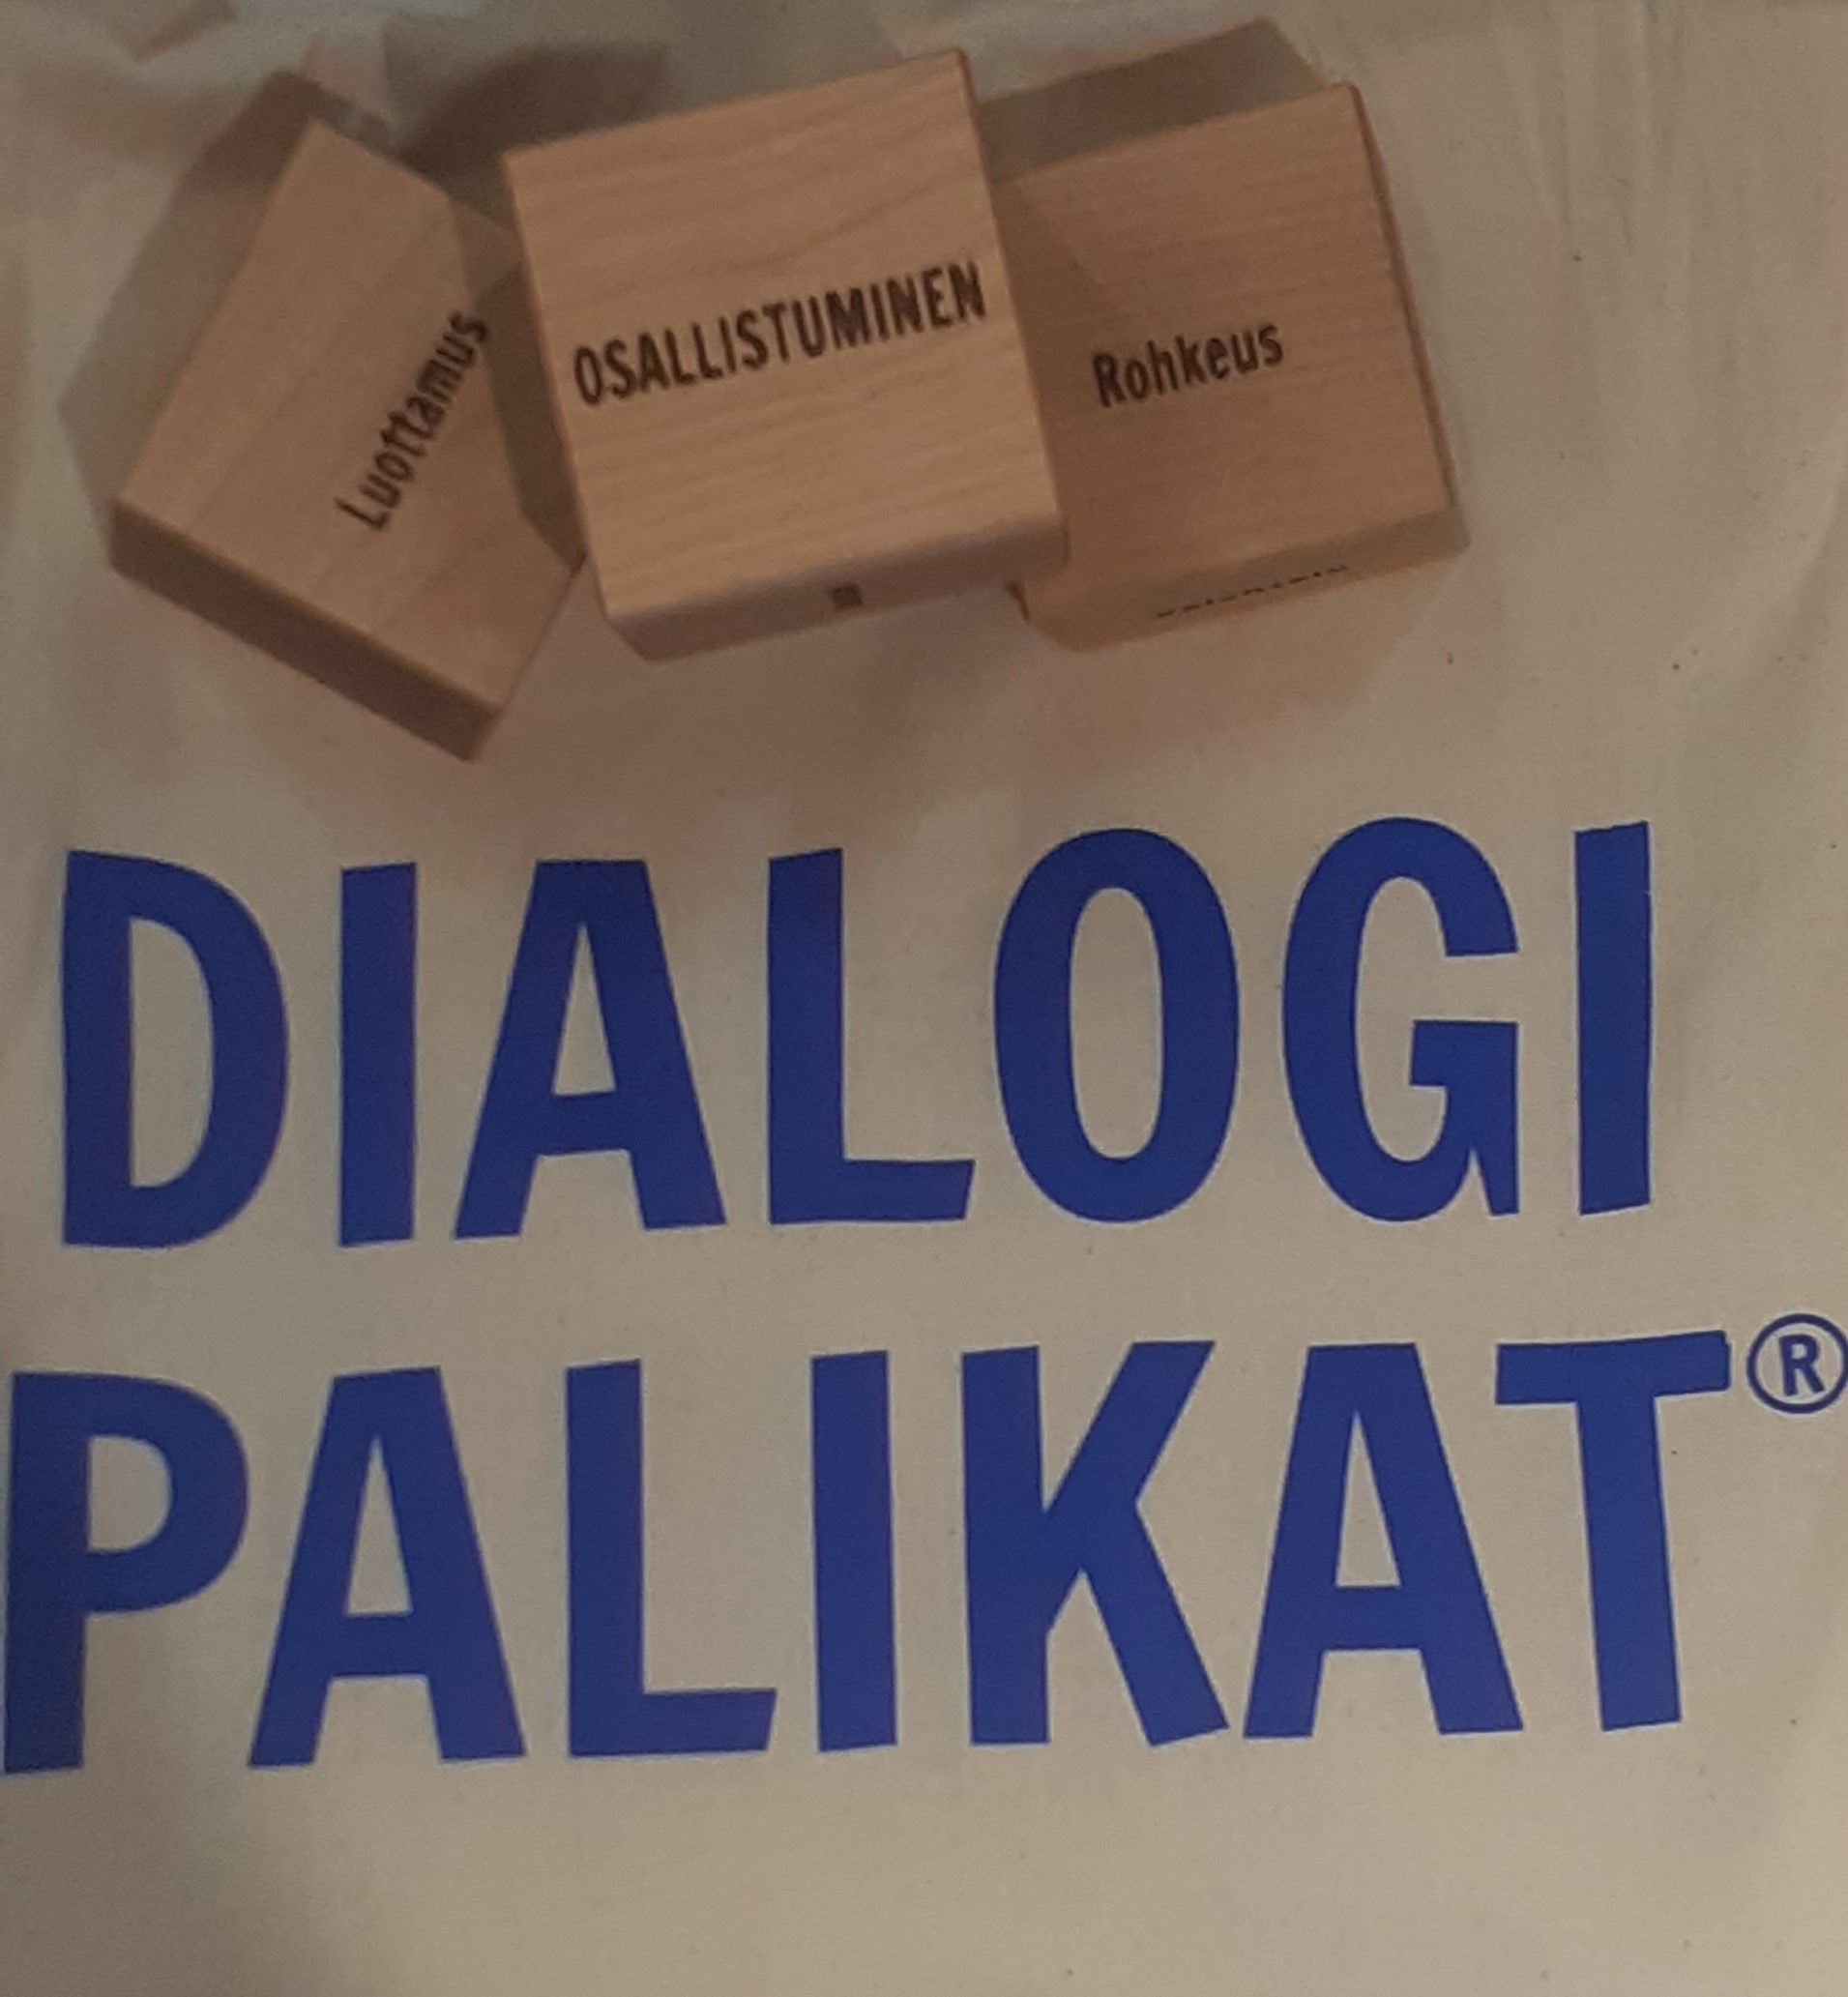 Read more about the article Dialogipalikat